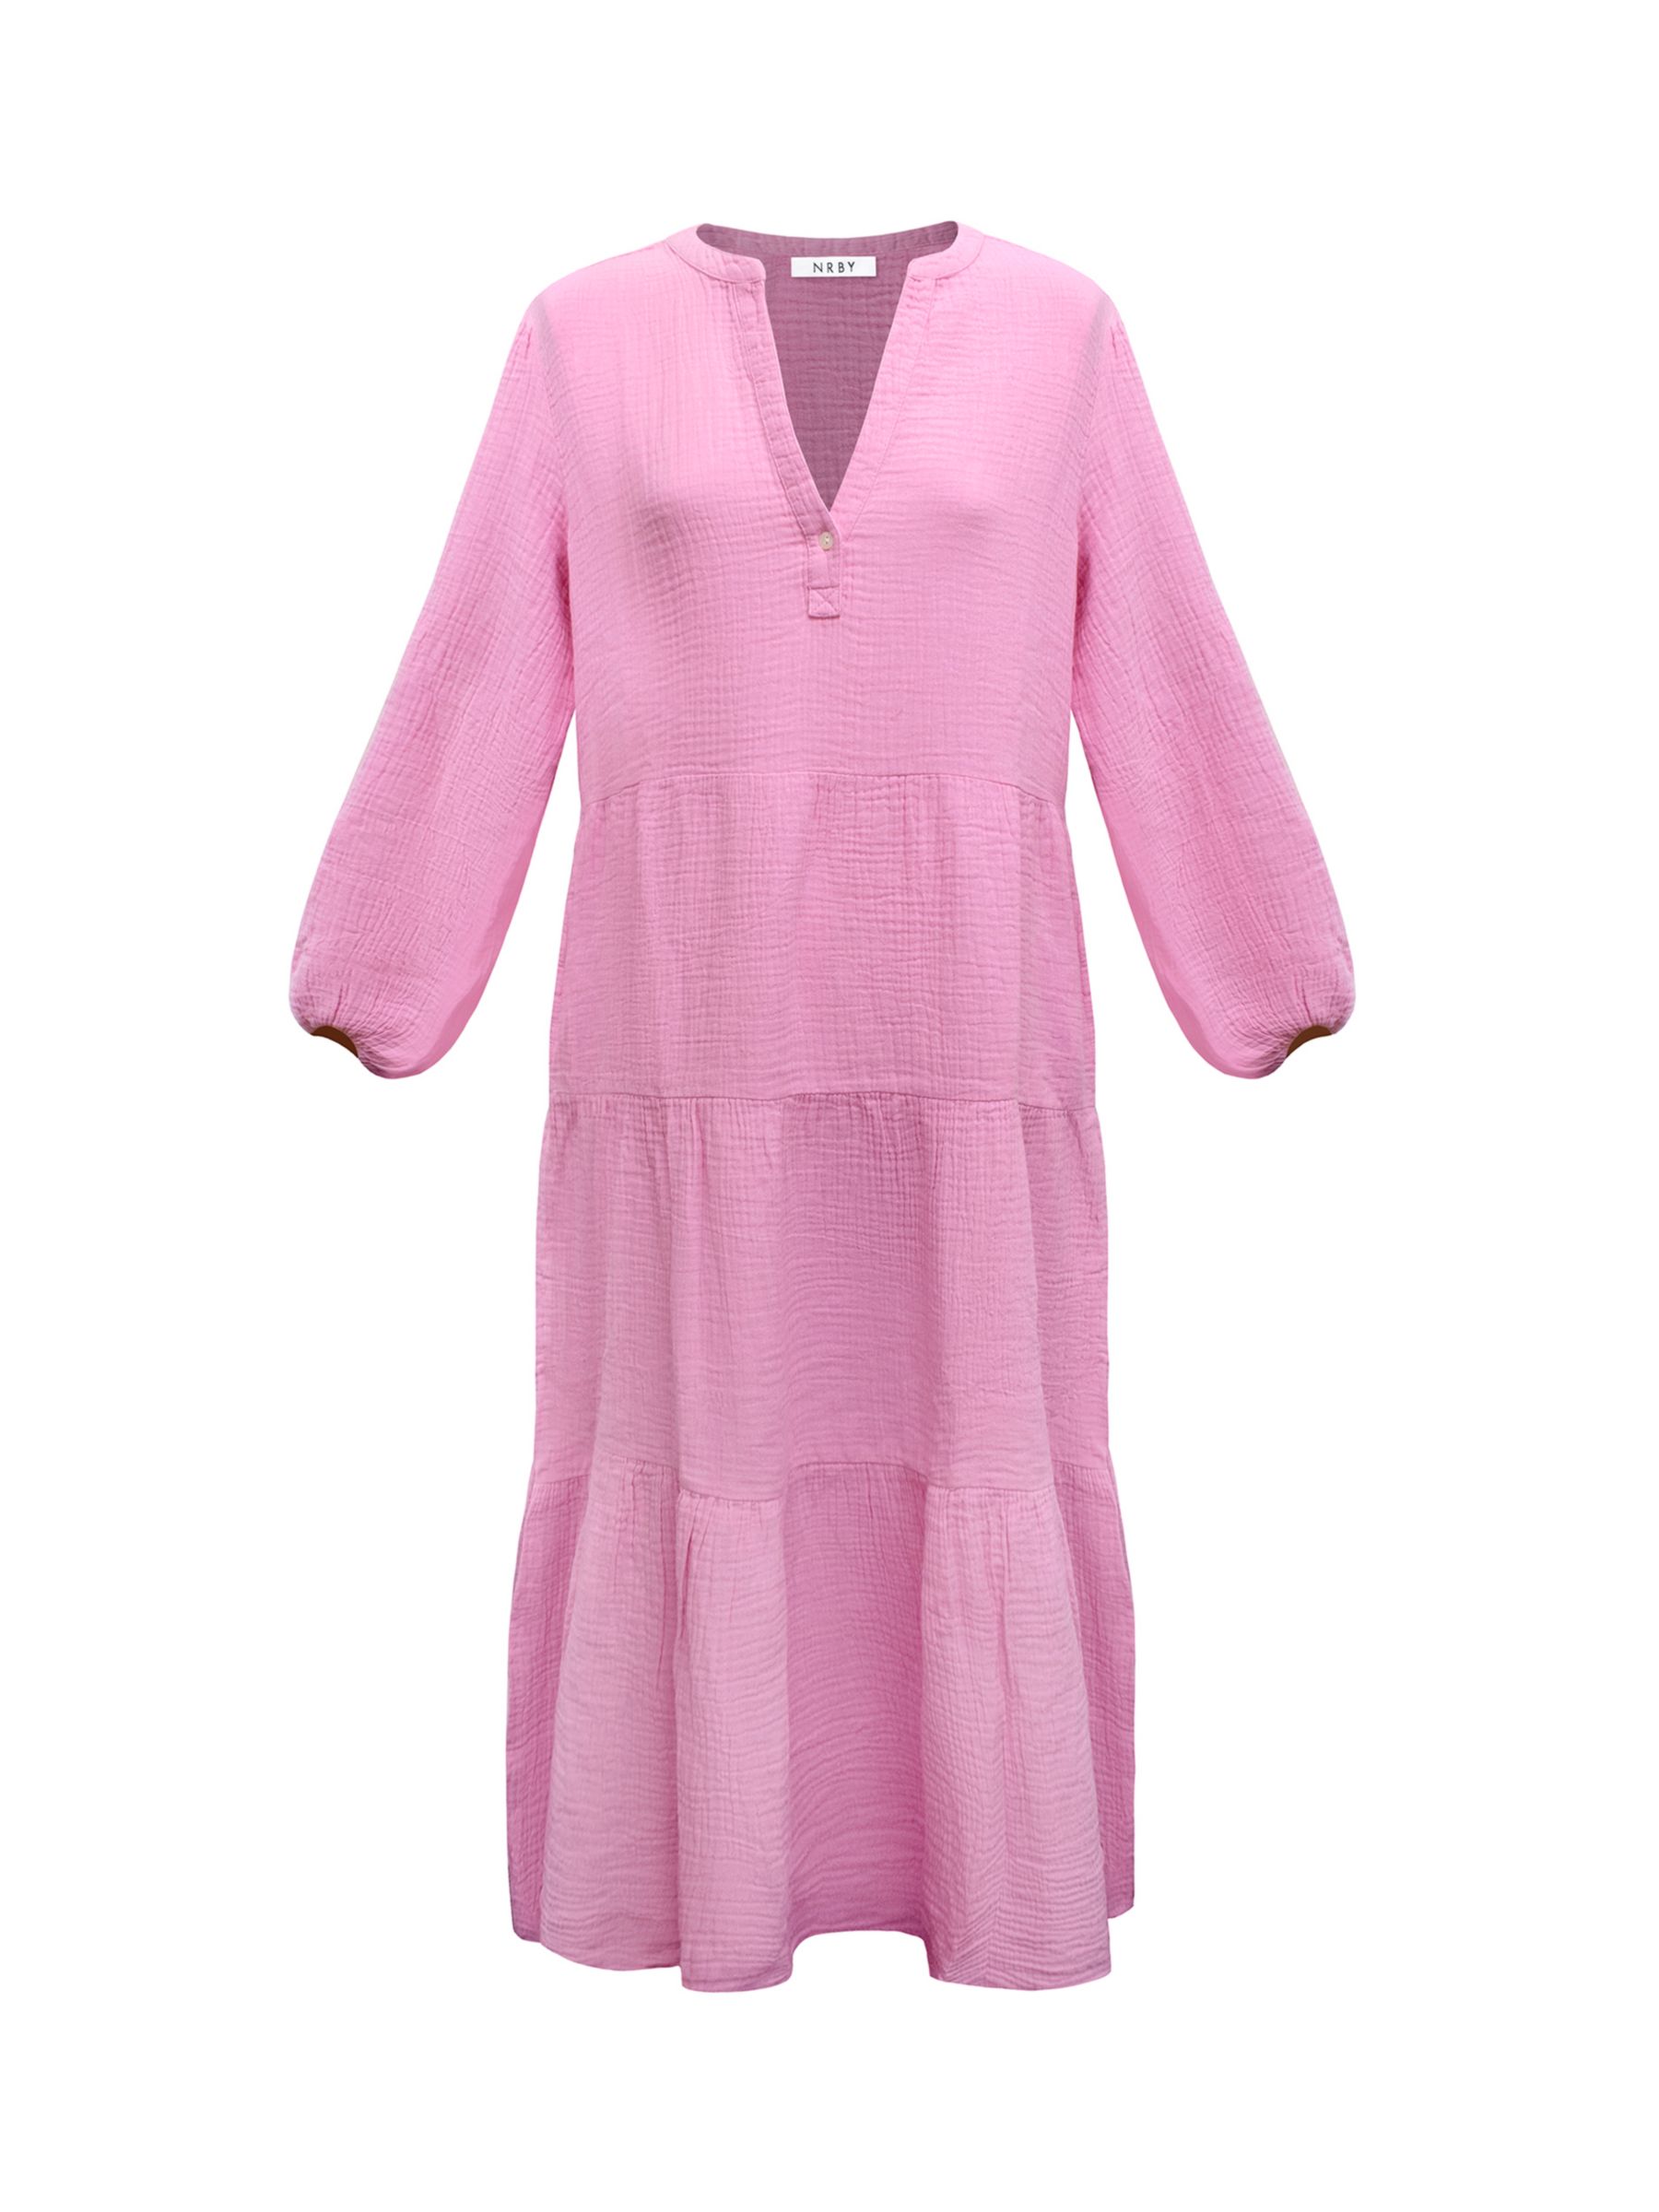 NRBY Marina Double Cloth Tiered Midi Dress, Pink at John Lewis & Partners